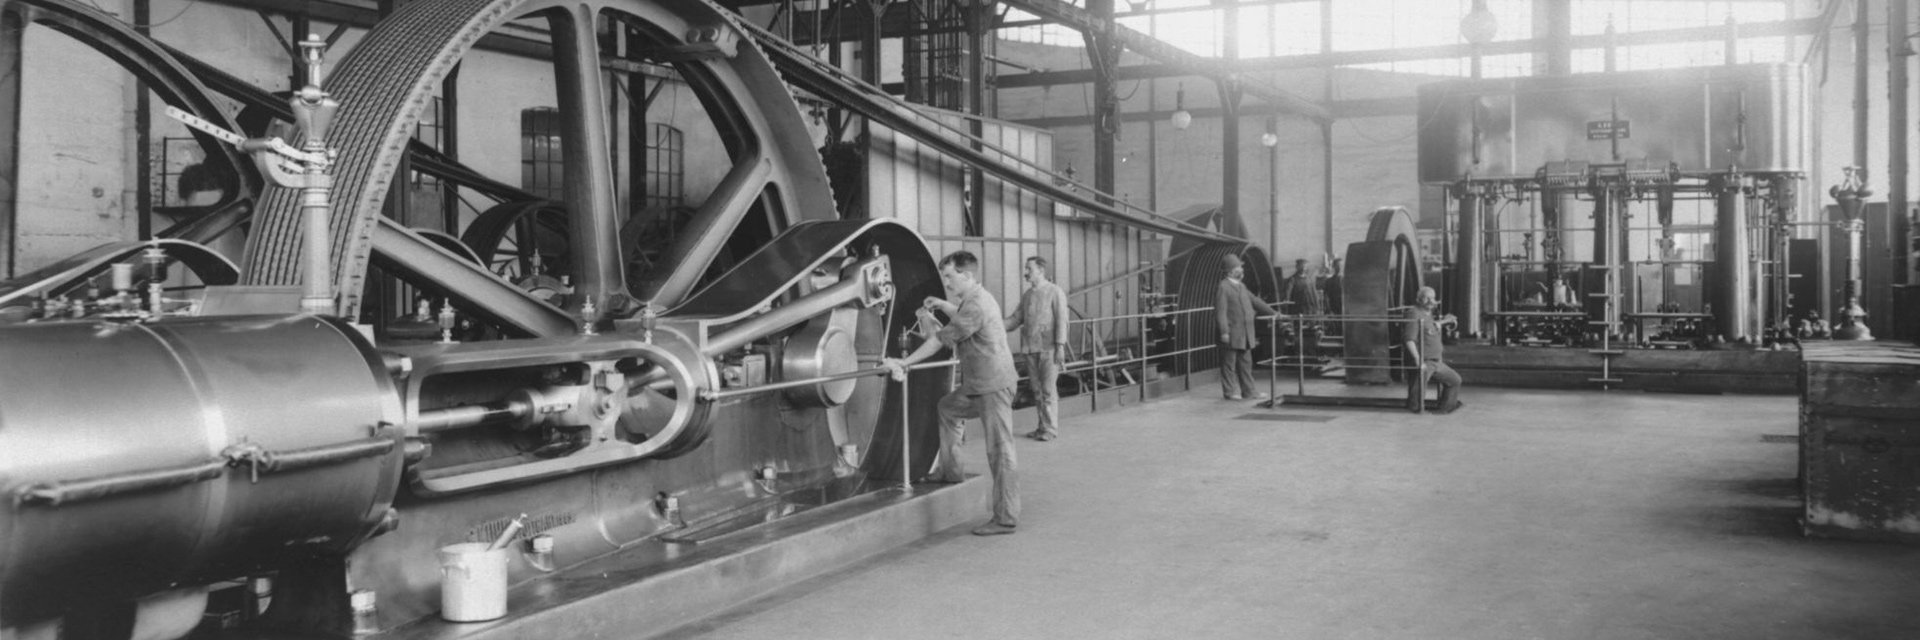 In an industrial hall workers are working on a steam engine